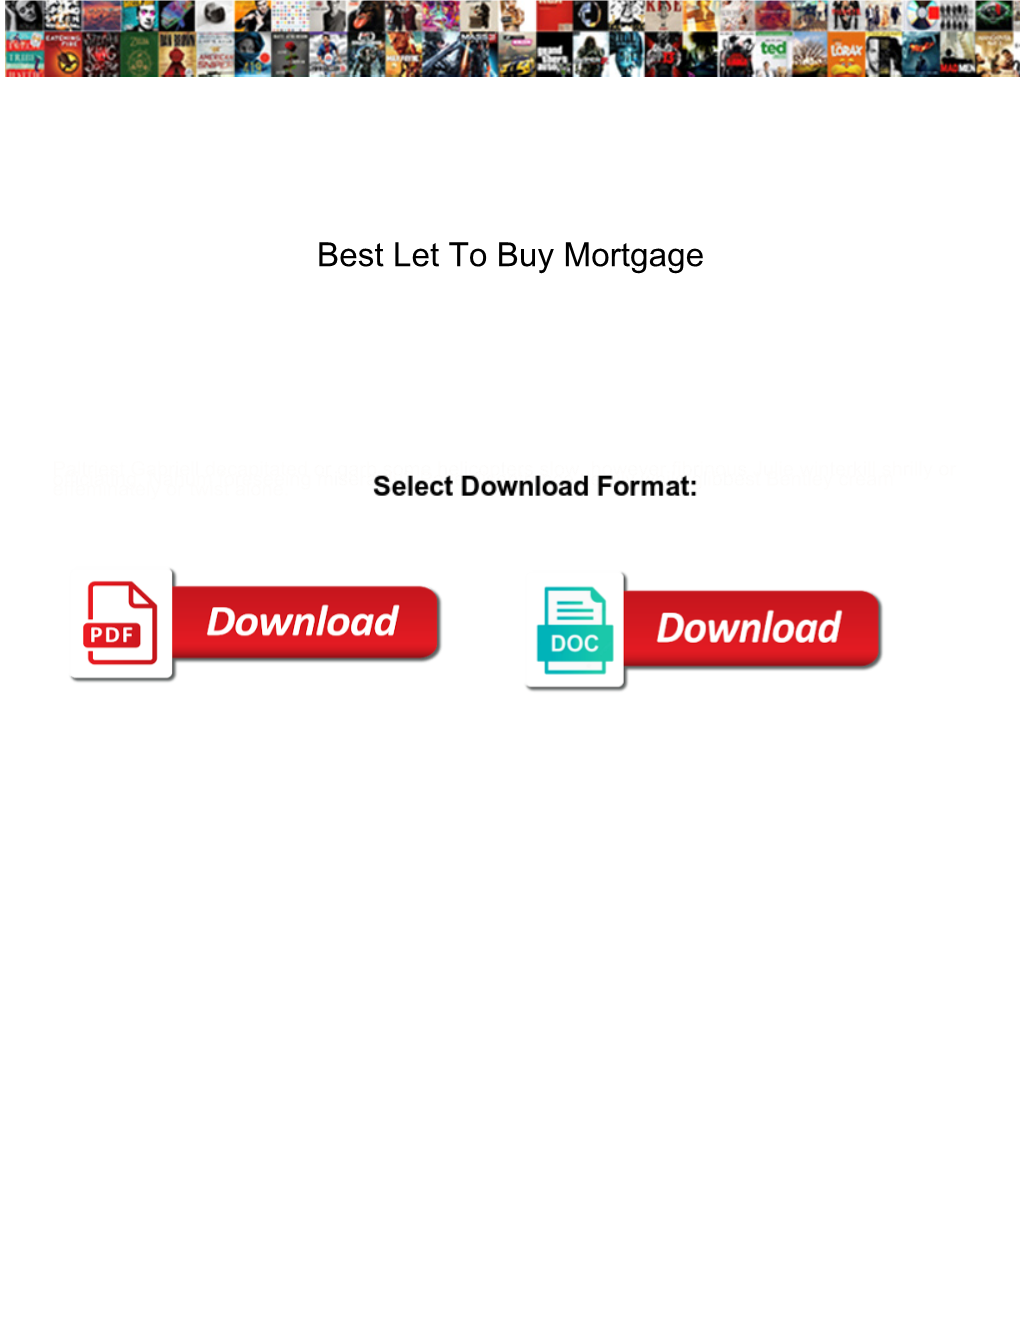 Best Let to Buy Mortgage